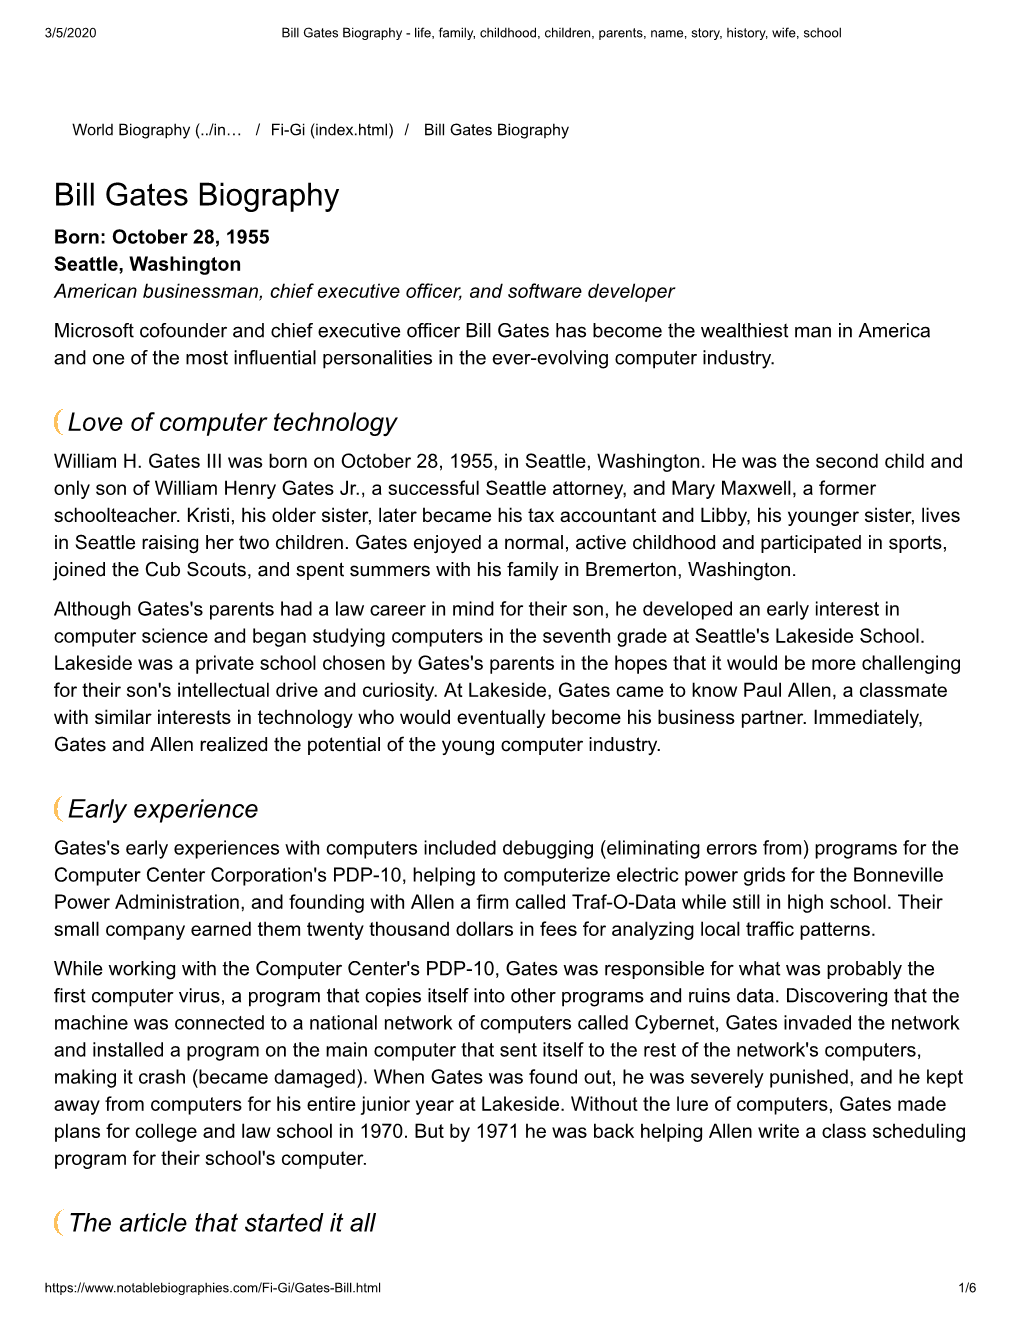 Bill Gates Biography - Life, Family, Childhood, Children, Parents, Name, Story, History, Wife, School